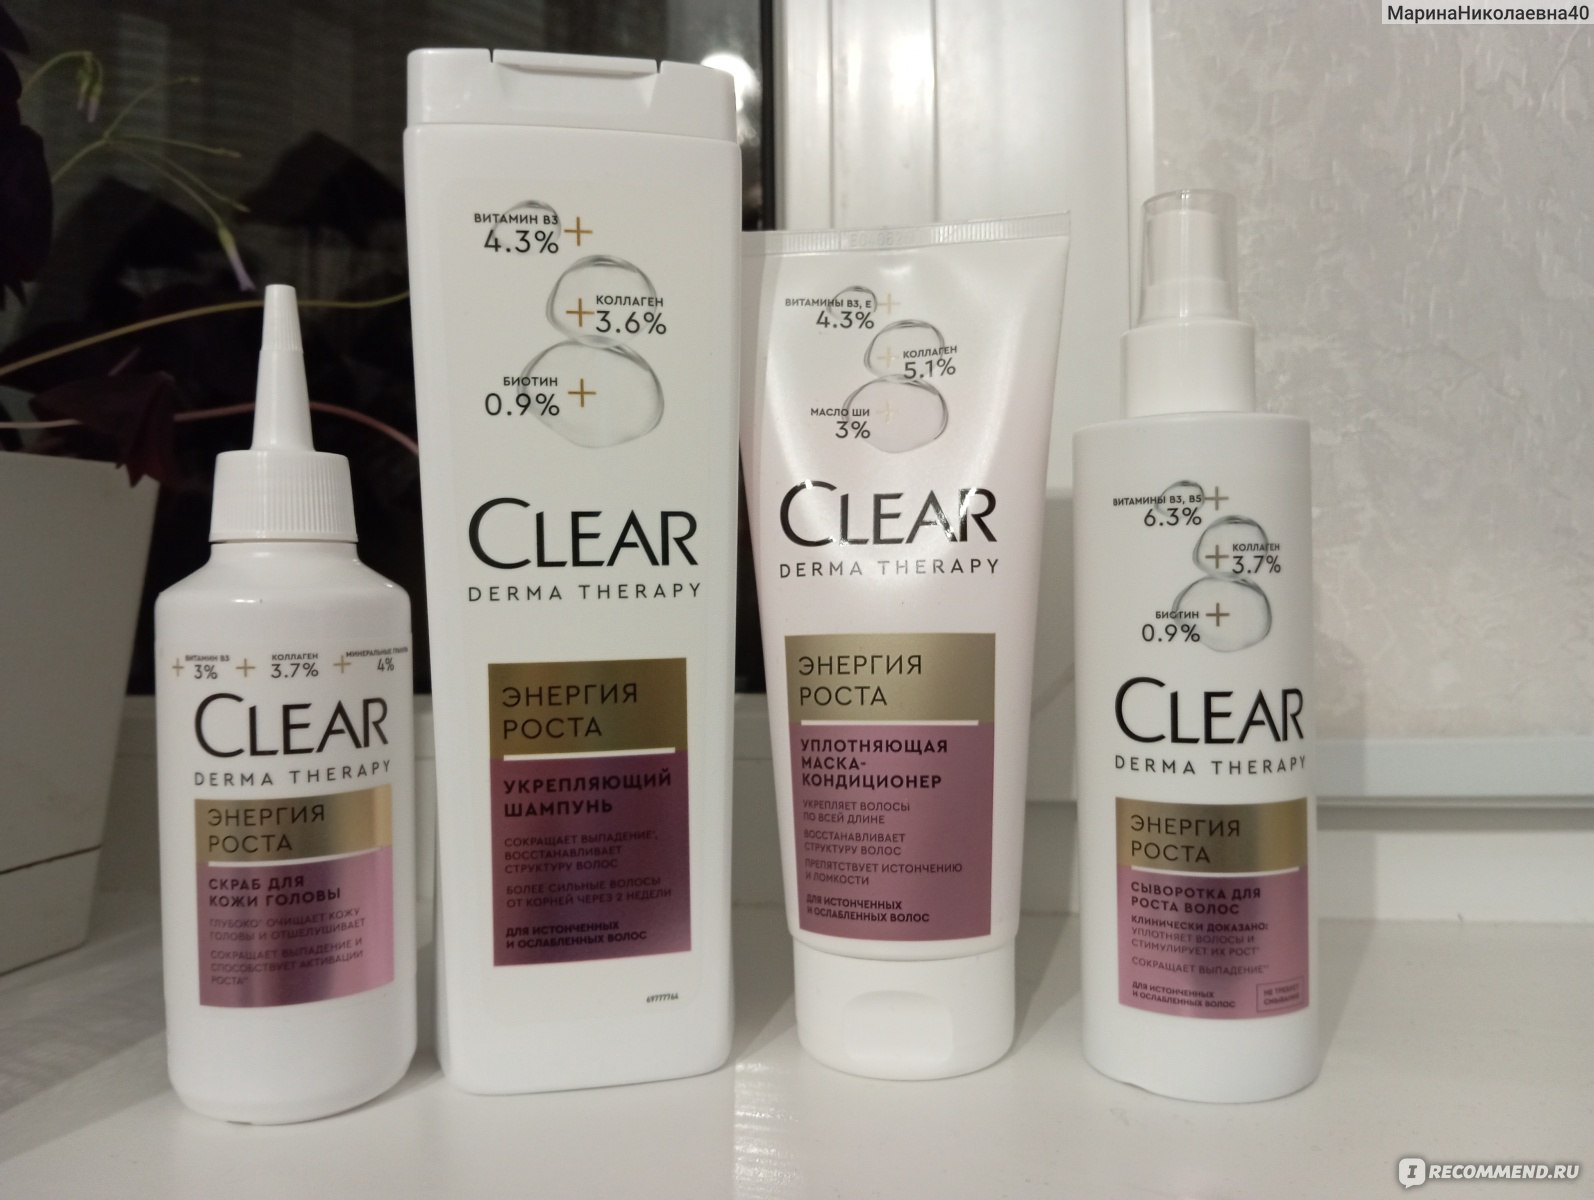 Clear derma therapy отзывы